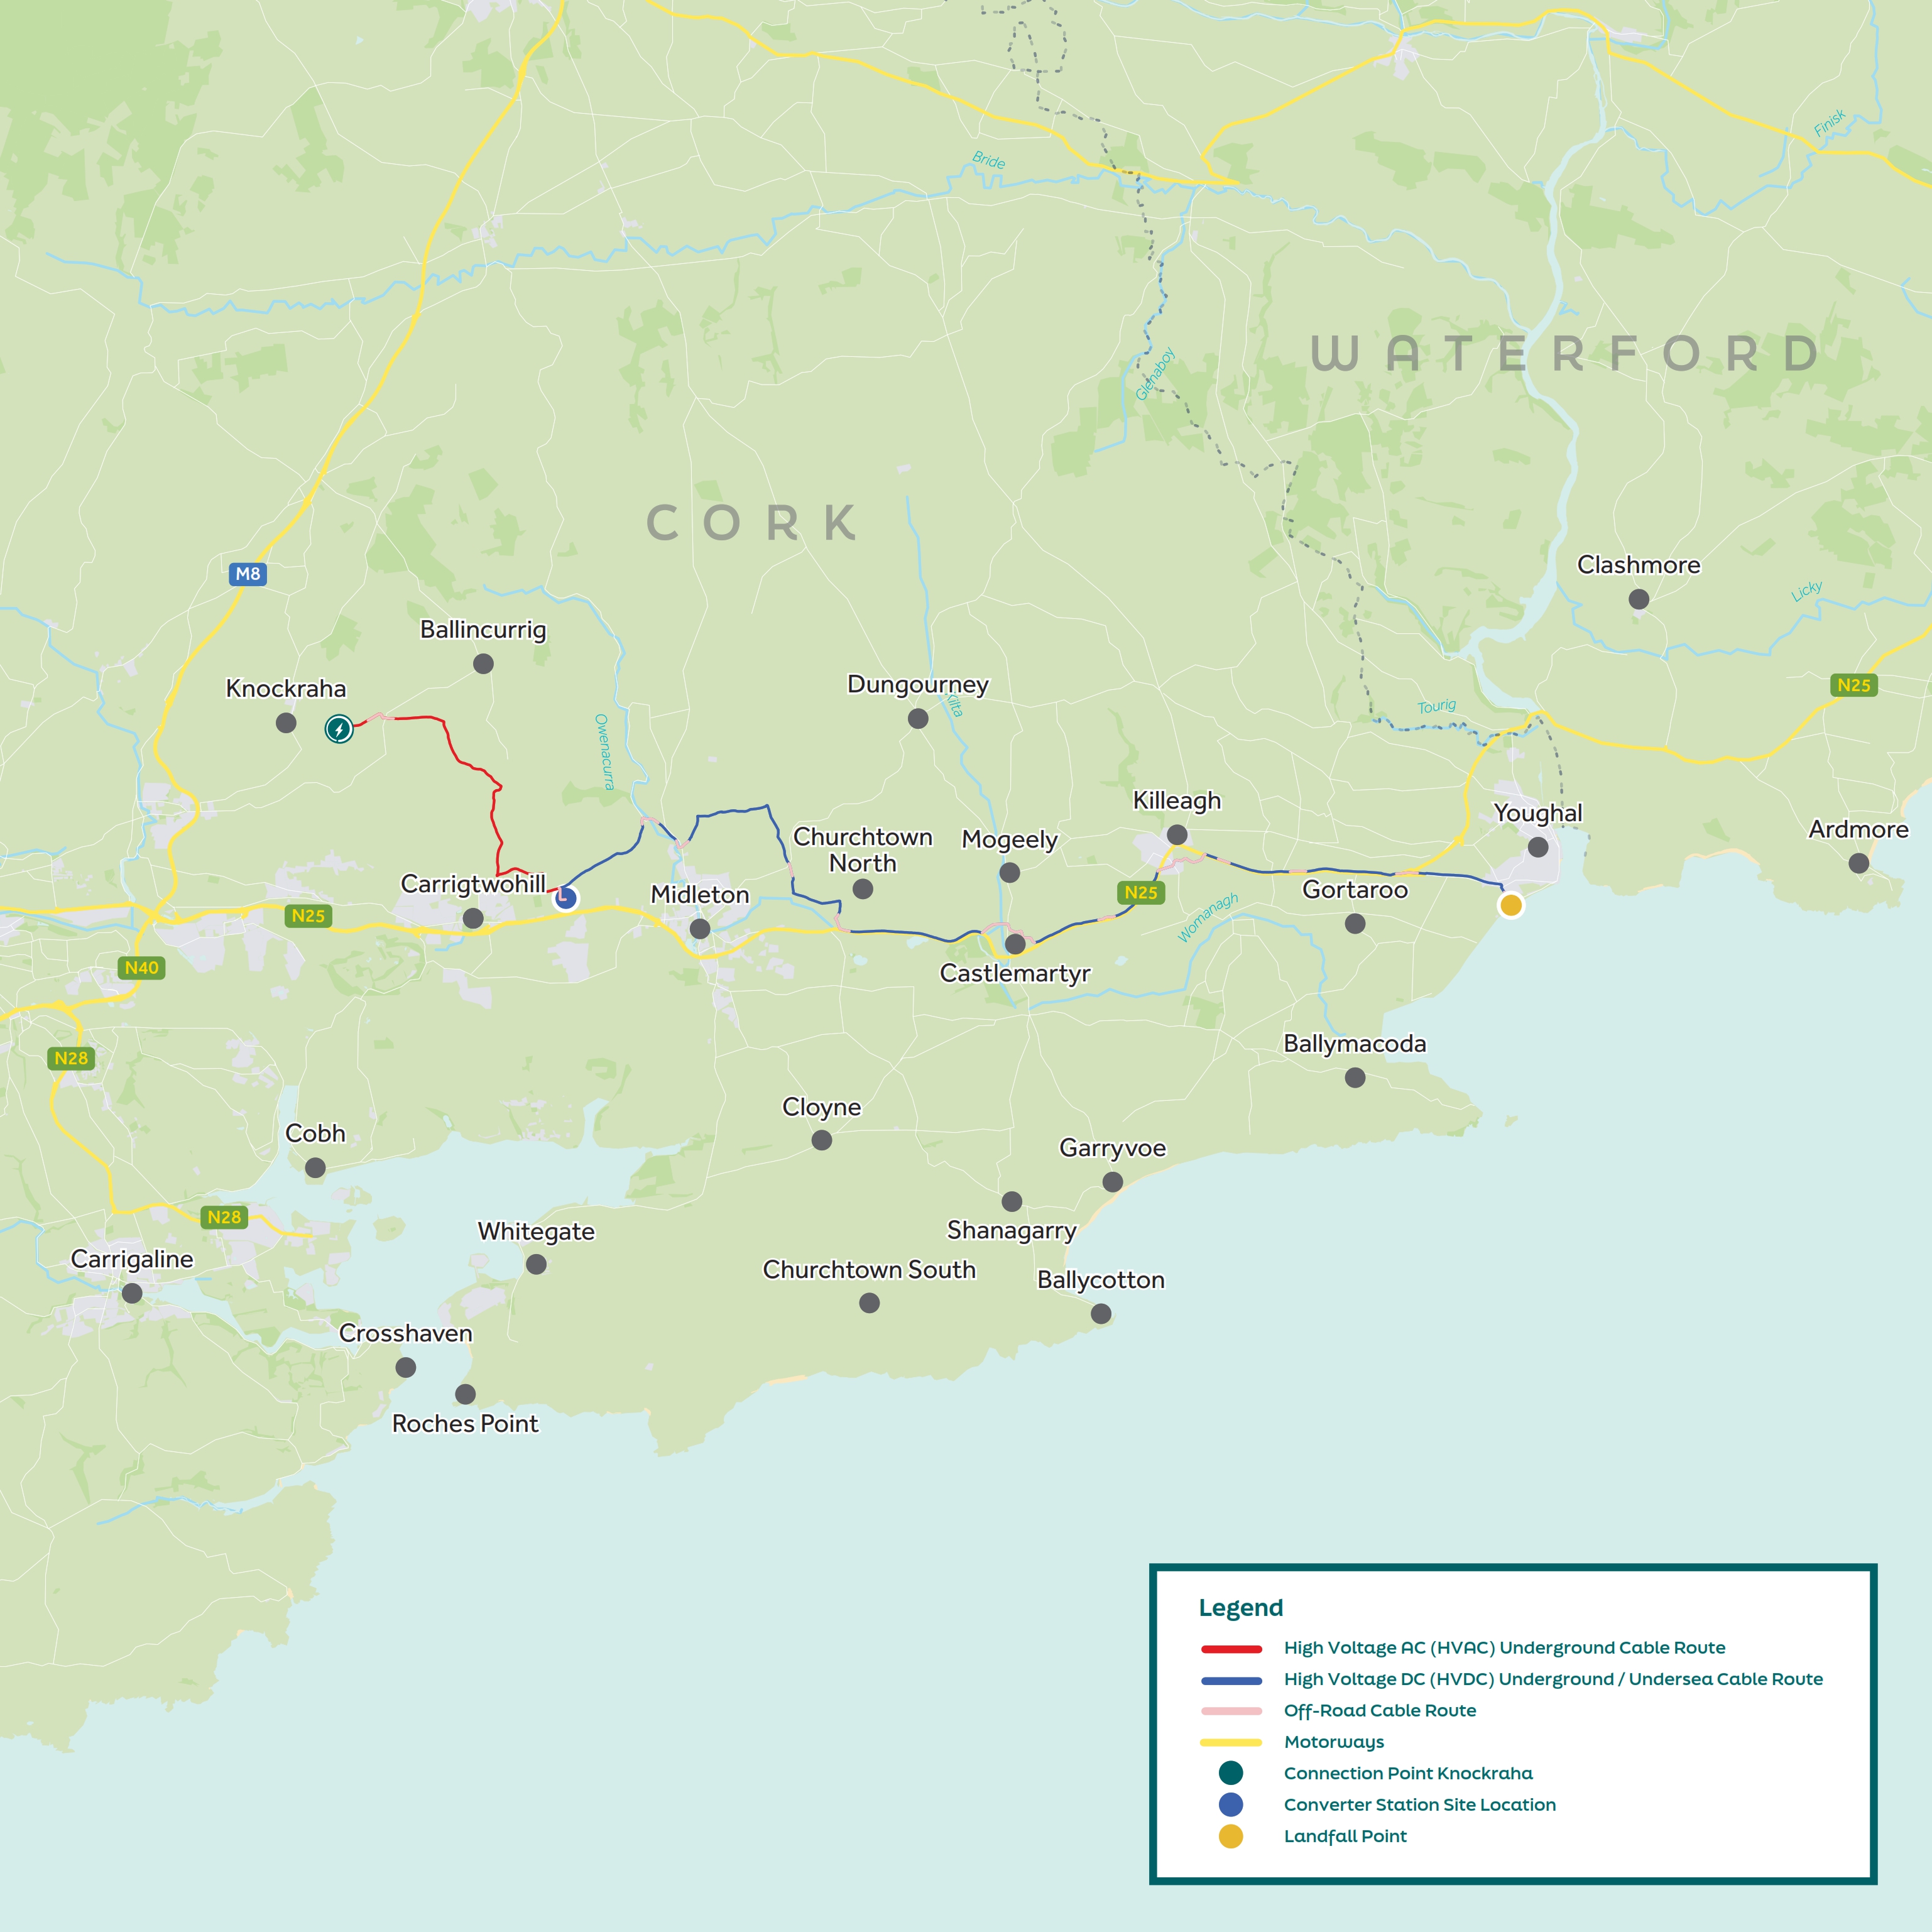 Celtic Interconnector Onshore project area